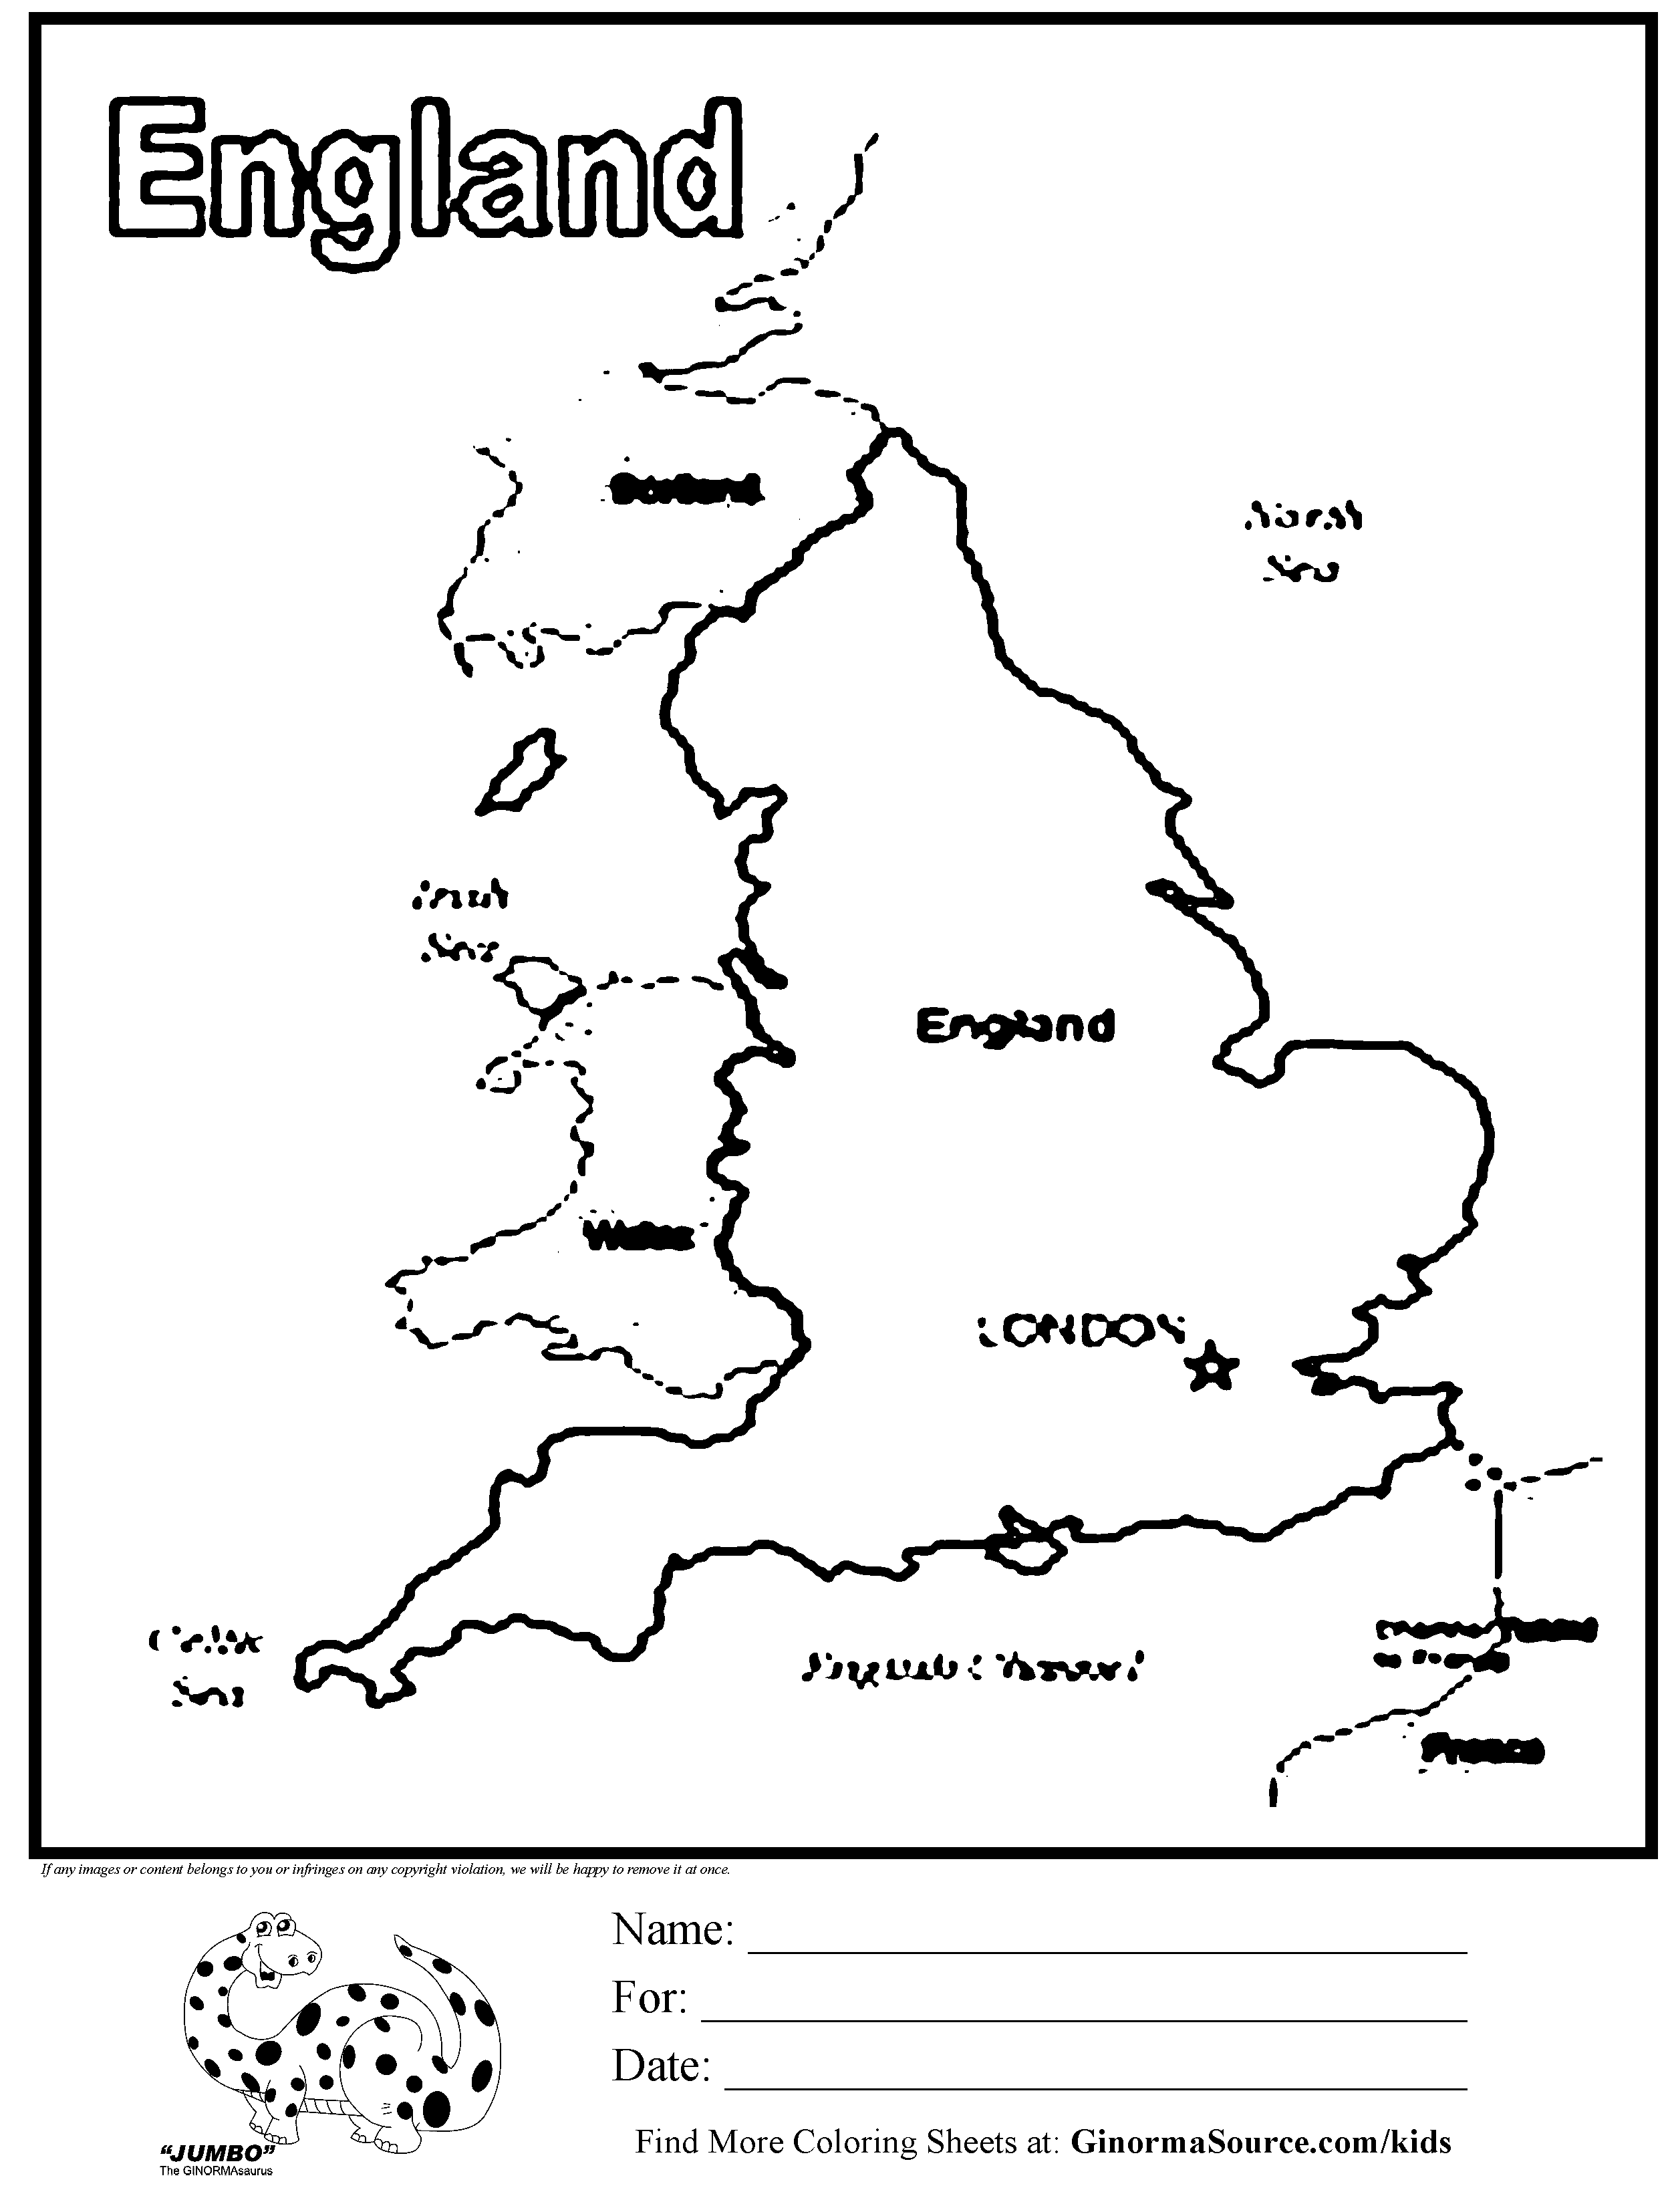 England coloring #11, Download drawings